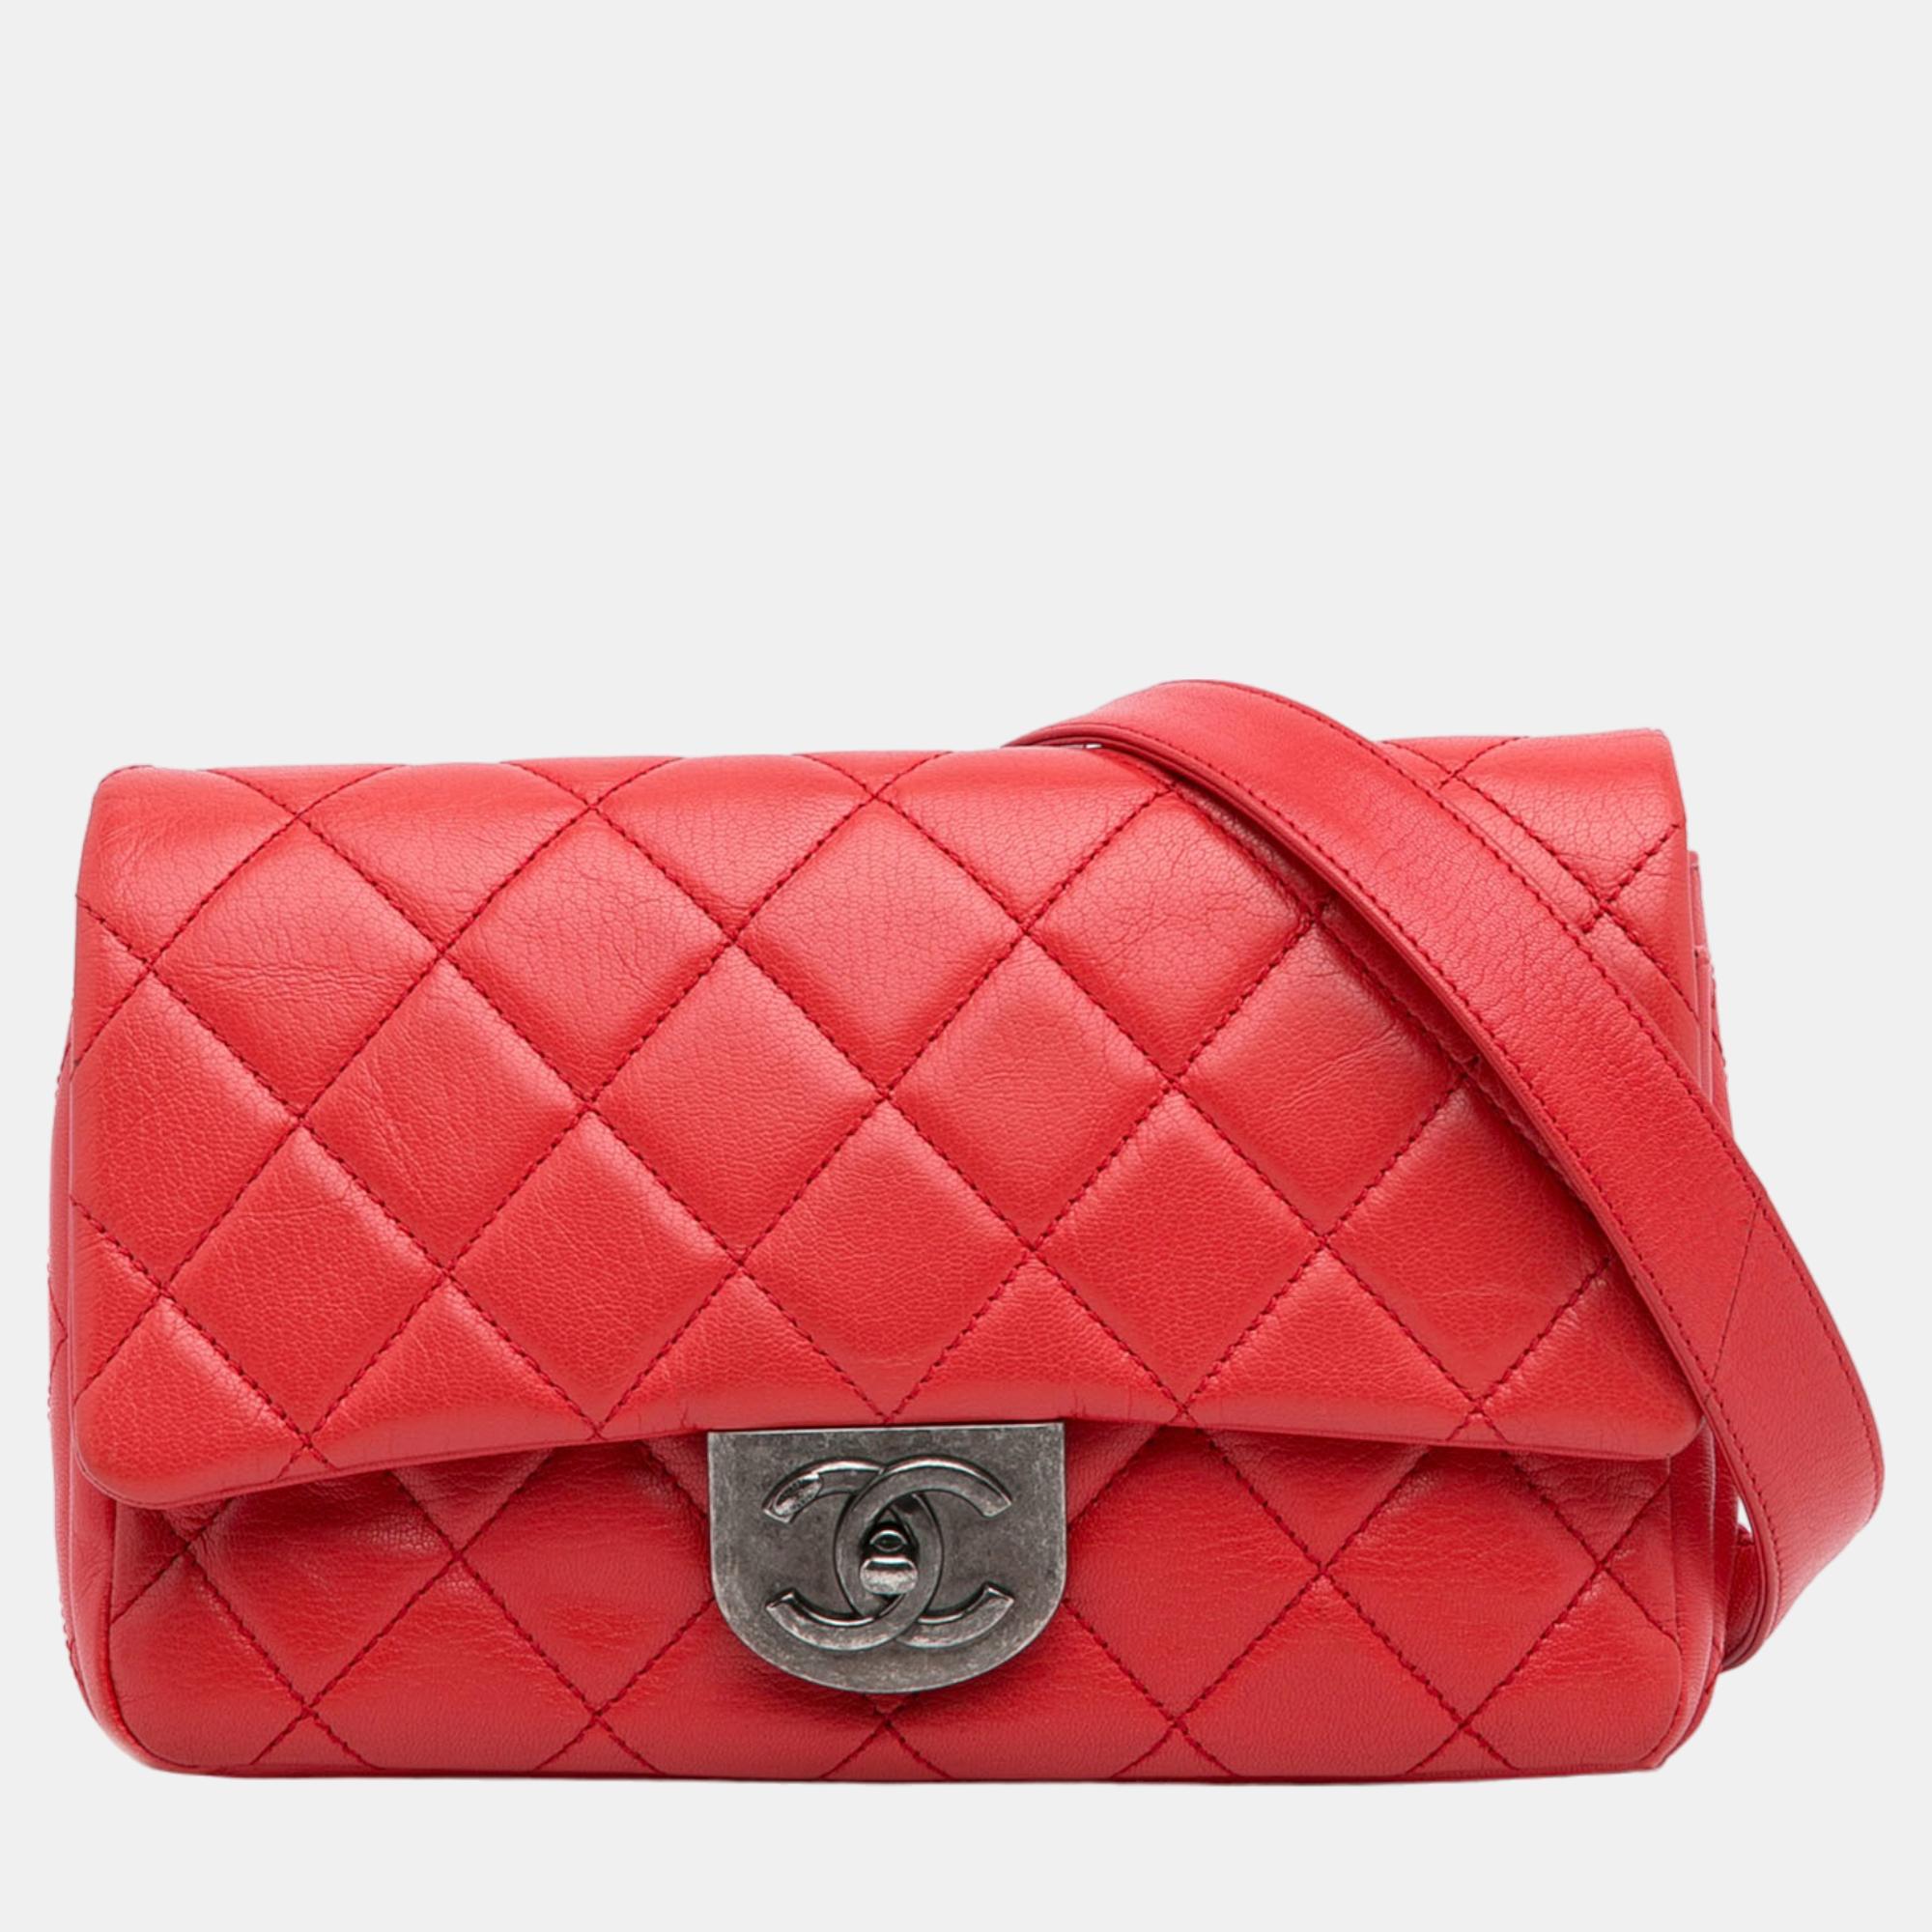 Chanel red small goatskin double carry waist chain flap